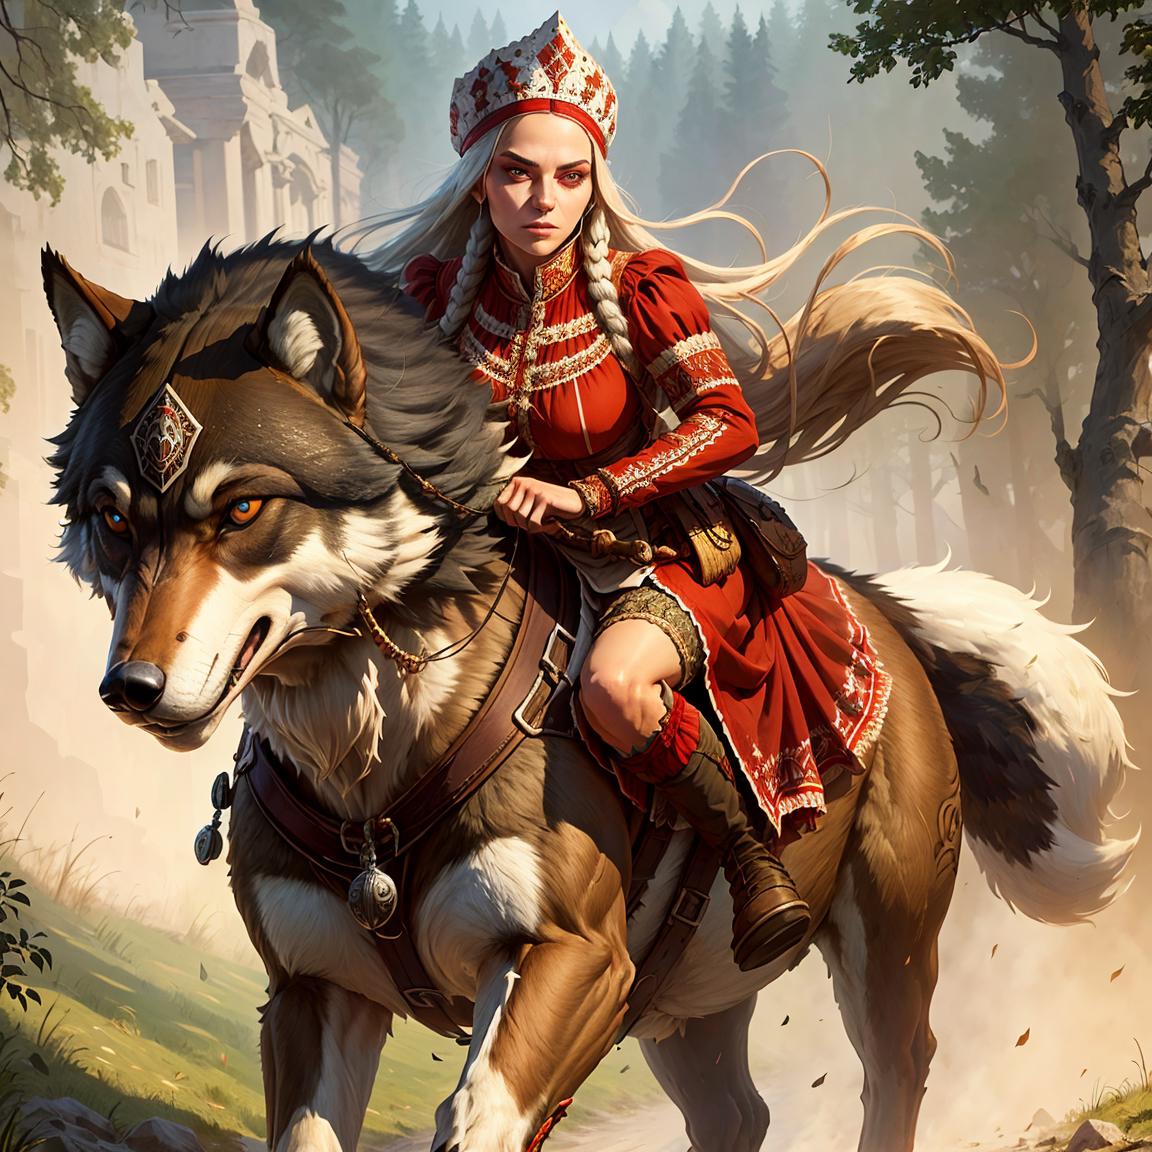 A woman wearing a red dress riding a wolf.